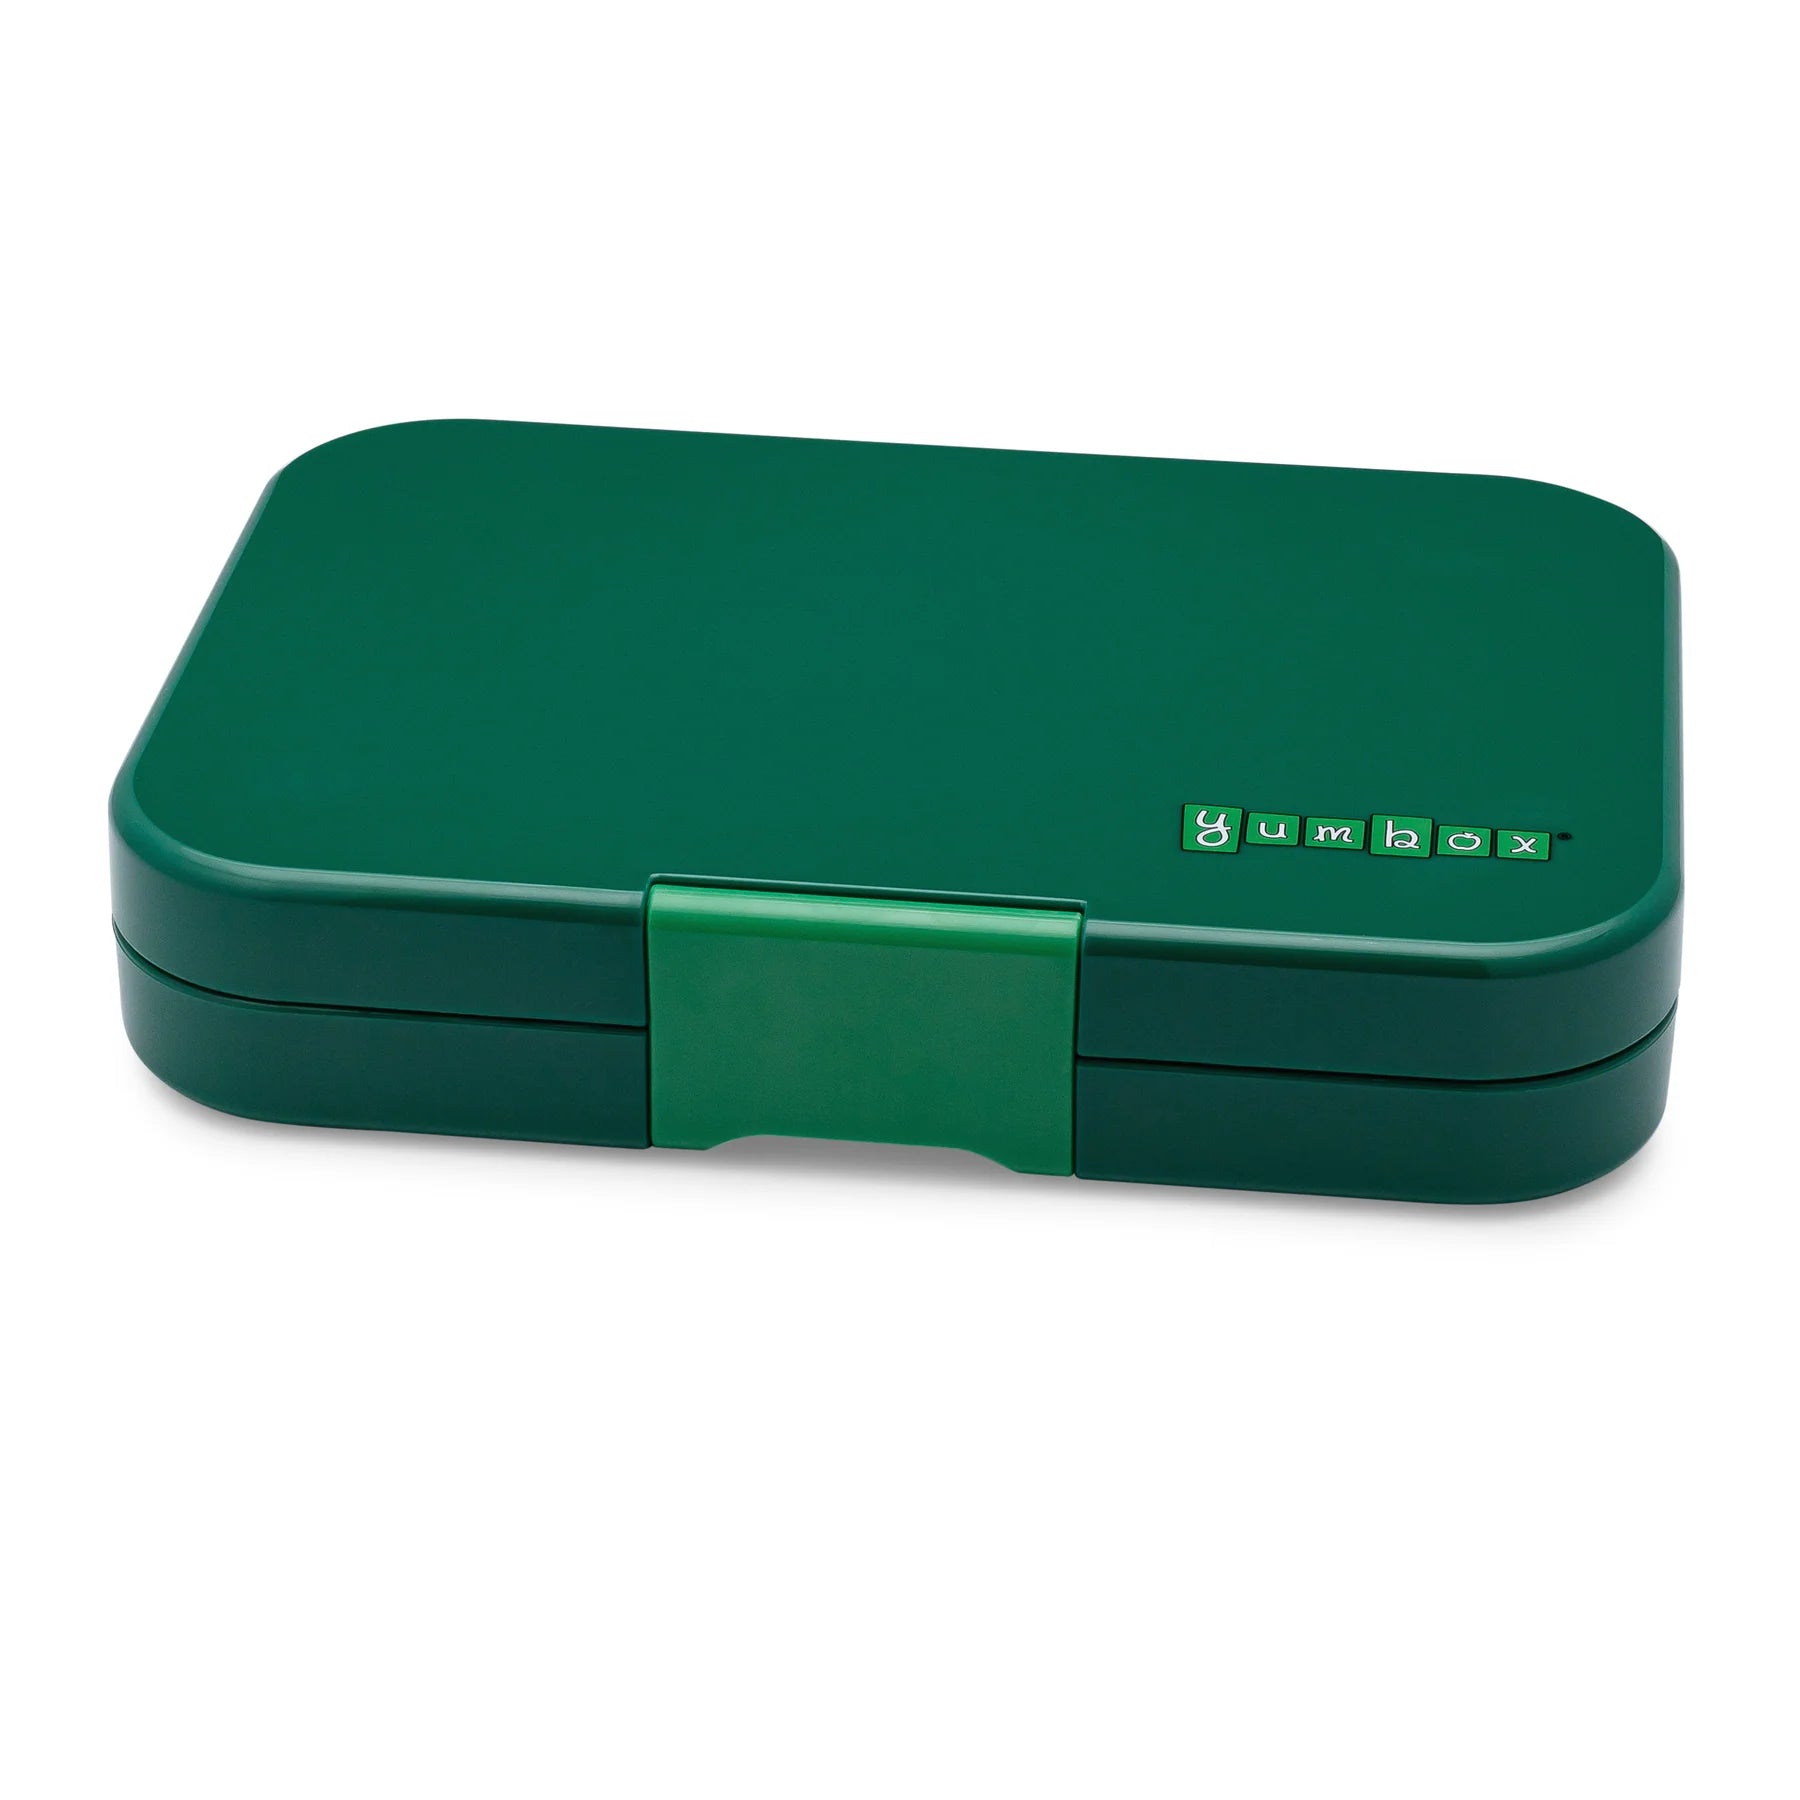 Yumbox Tapas 5-Compartment Food Tray - Greenwich Green/Clear Green 2